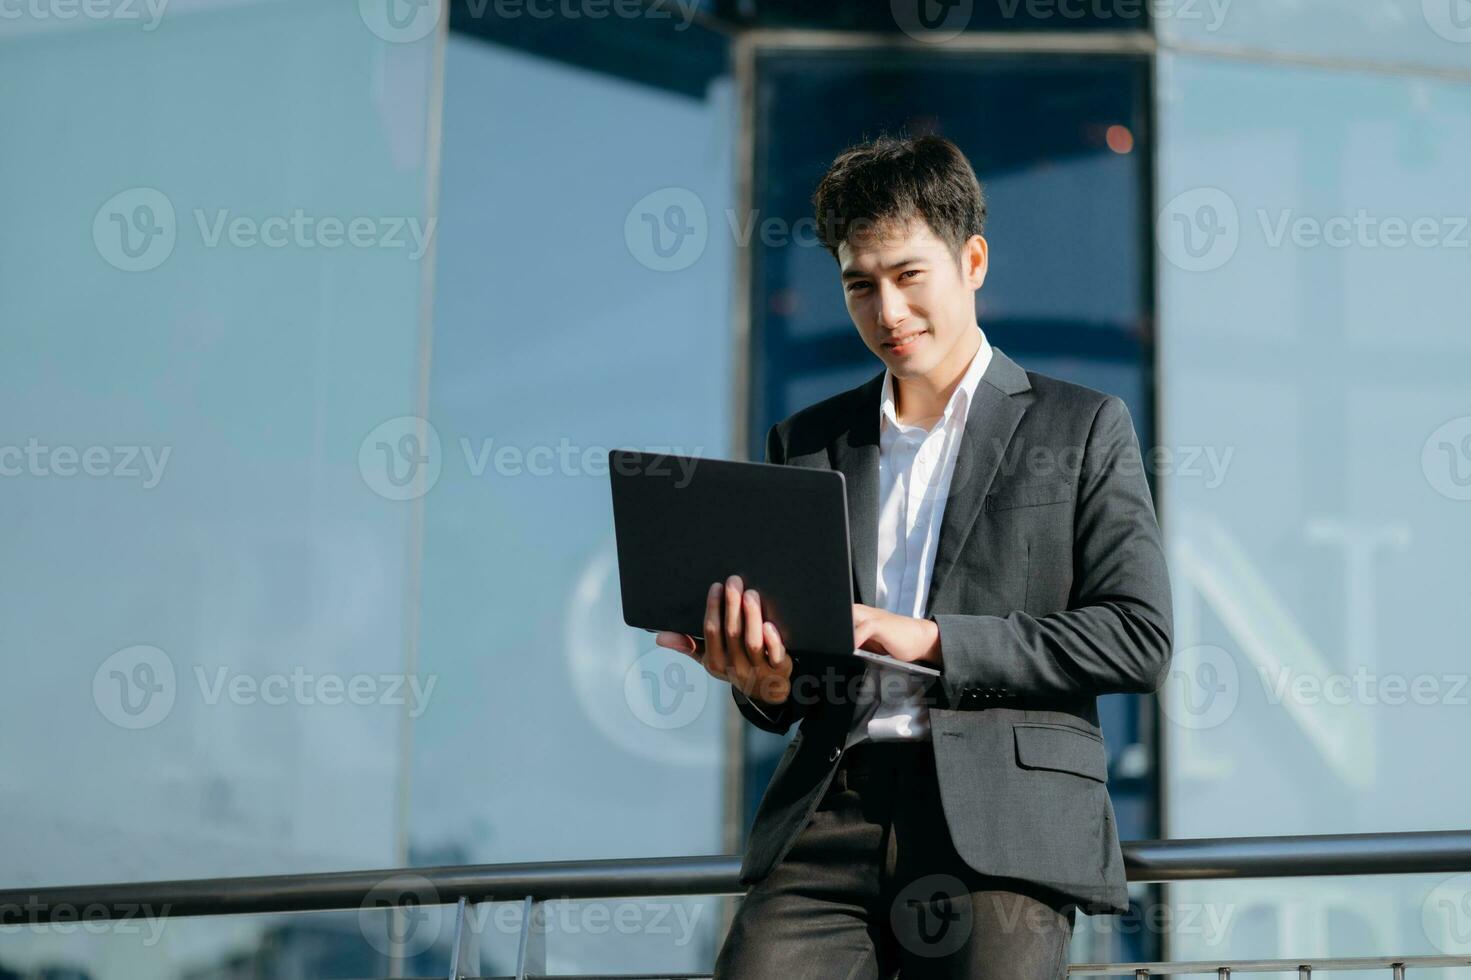 Young Asian business man working at outside business center with laptop, tablet, smartphone  and taking notes on the paper. photo